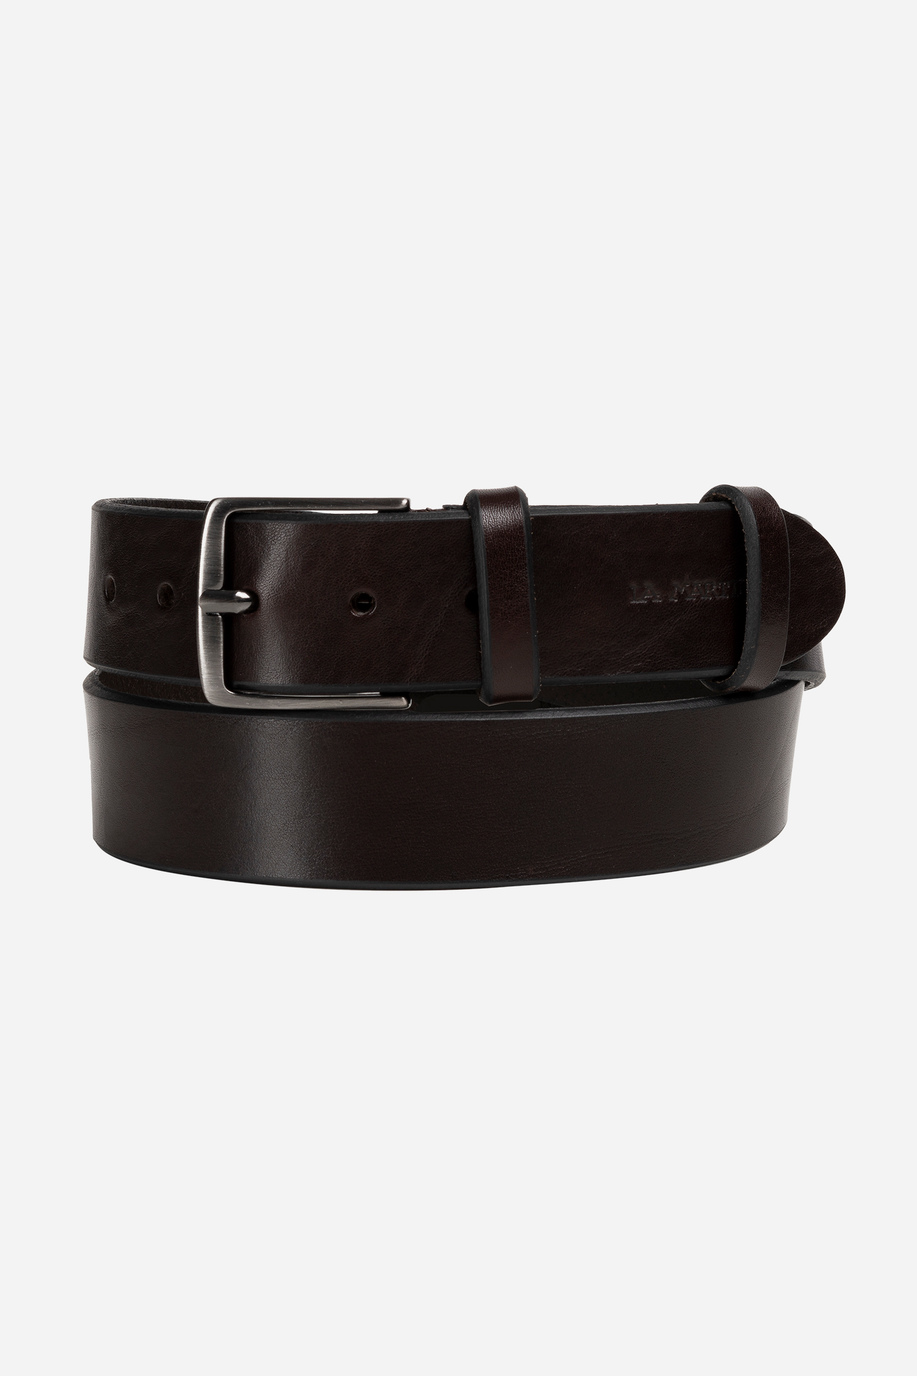 Men's belts by La Martina: discover the online collection